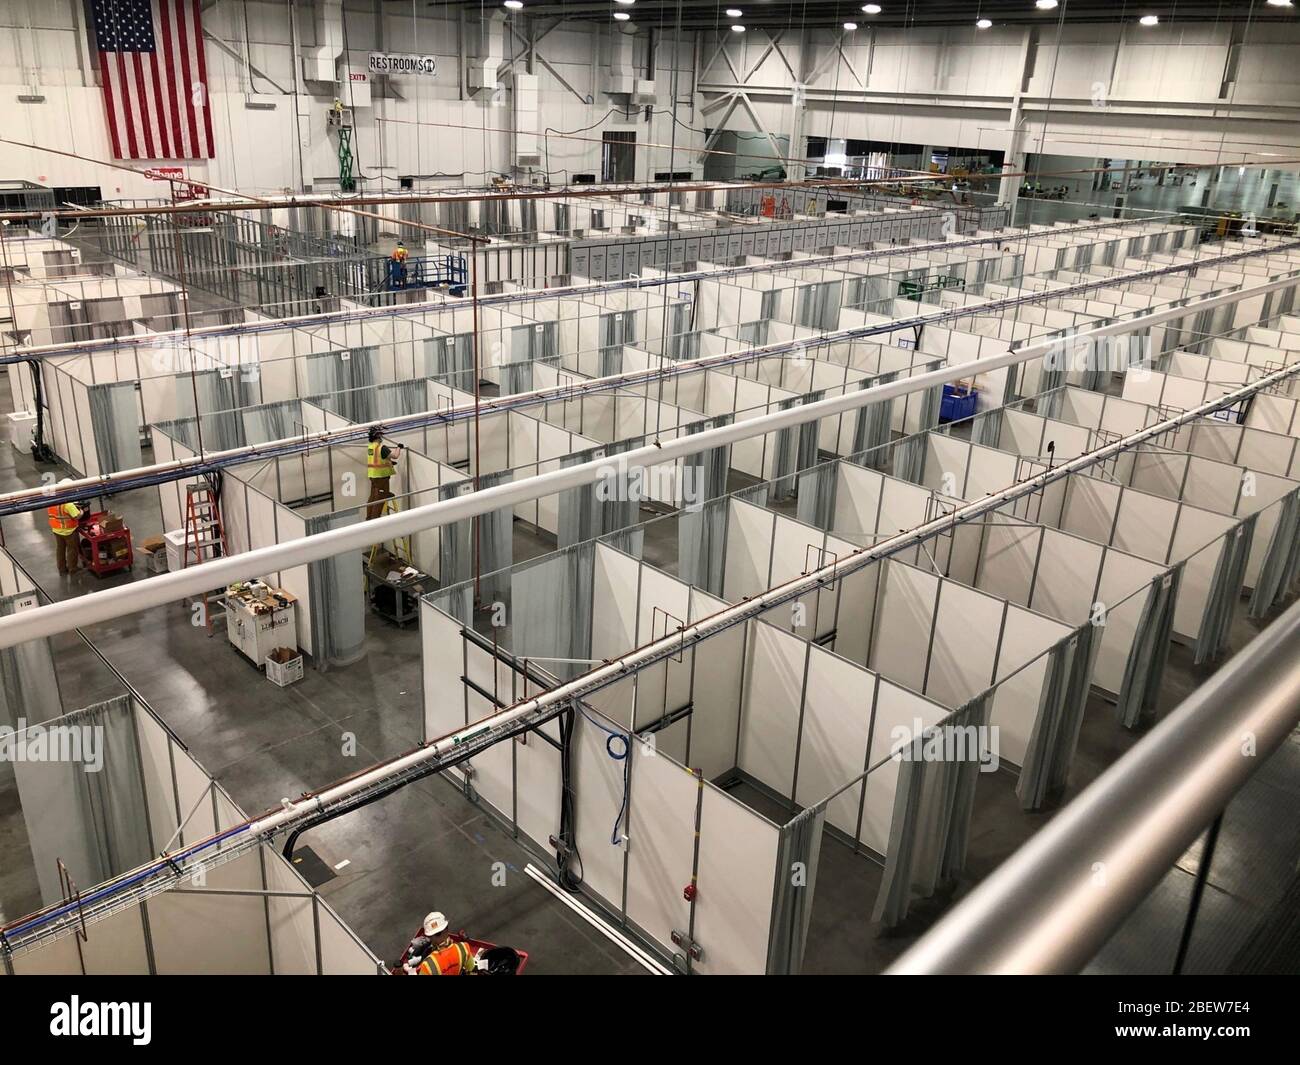 Hundreds of hospital beds cover the floor at a Federal Medical Station COVID-19, coronavirus pandemic relief facility set up at the Suburban Collection Showcase April 14, 2020 in Novi, Michigan. Stock Photo